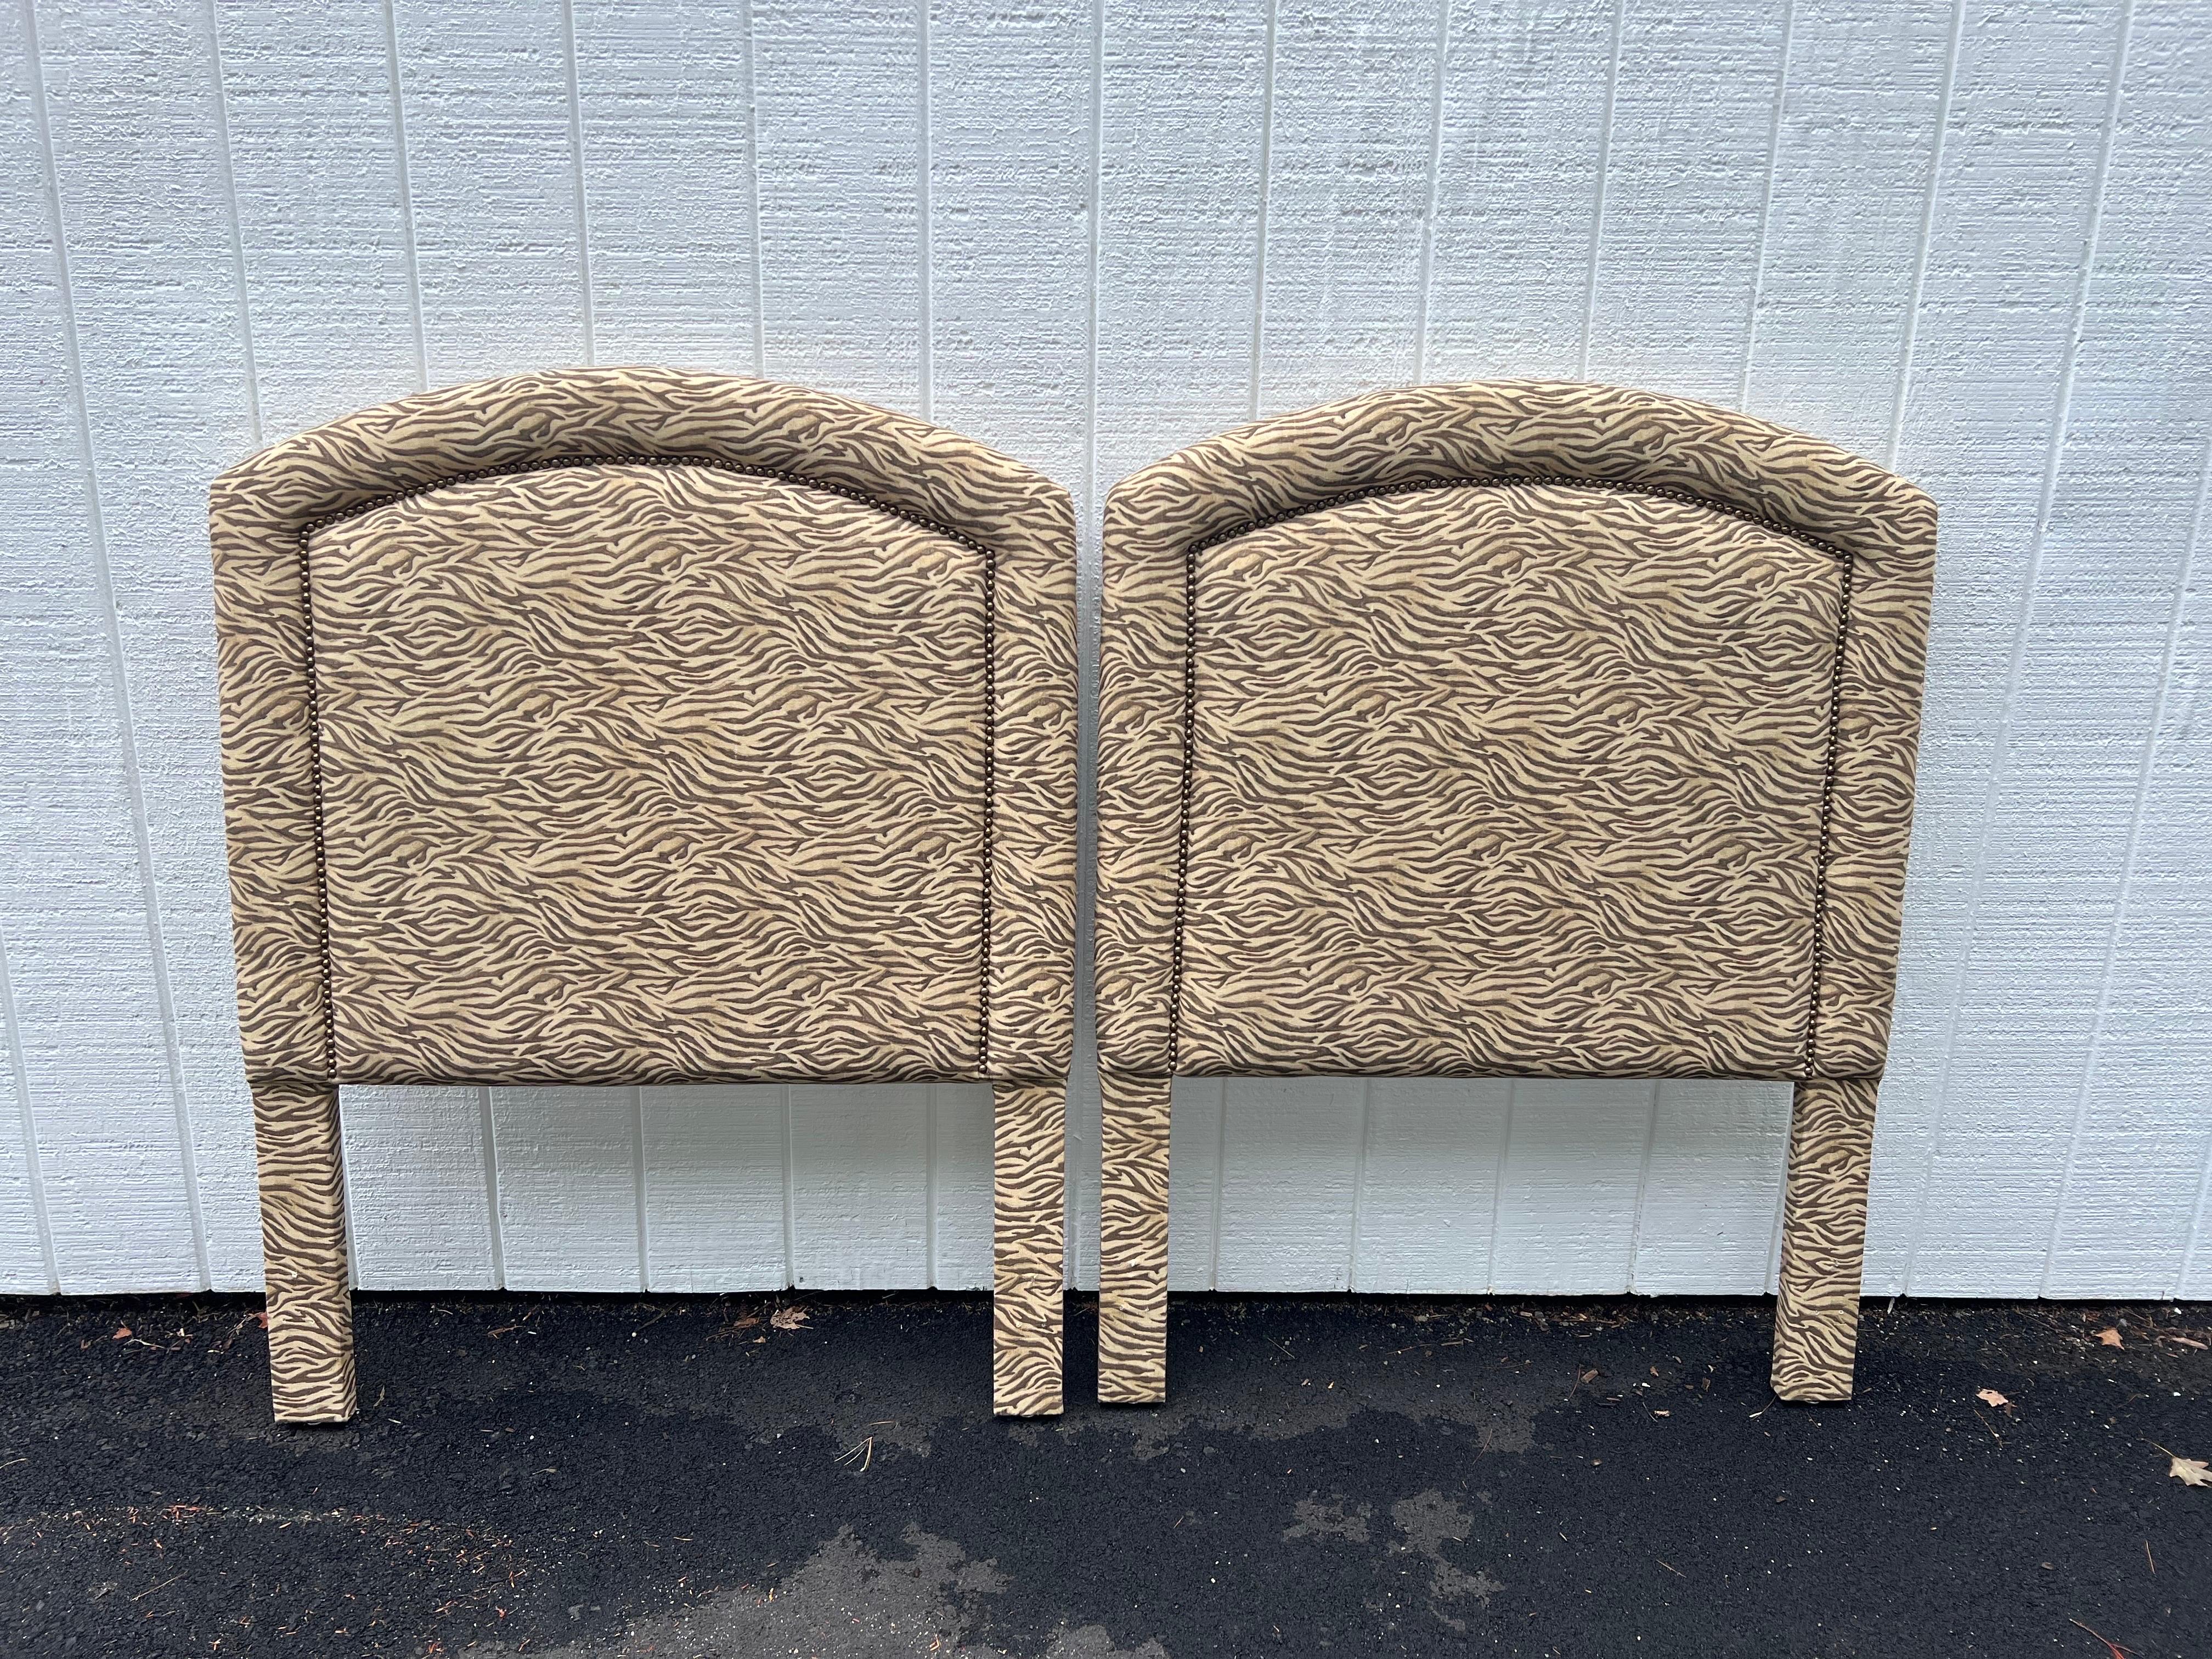 Pair of Zebra Print Twin Headboards. Classic design with gunmetal beads. 
In excellent condition. Use as is or recover but they don't need to be recovered.